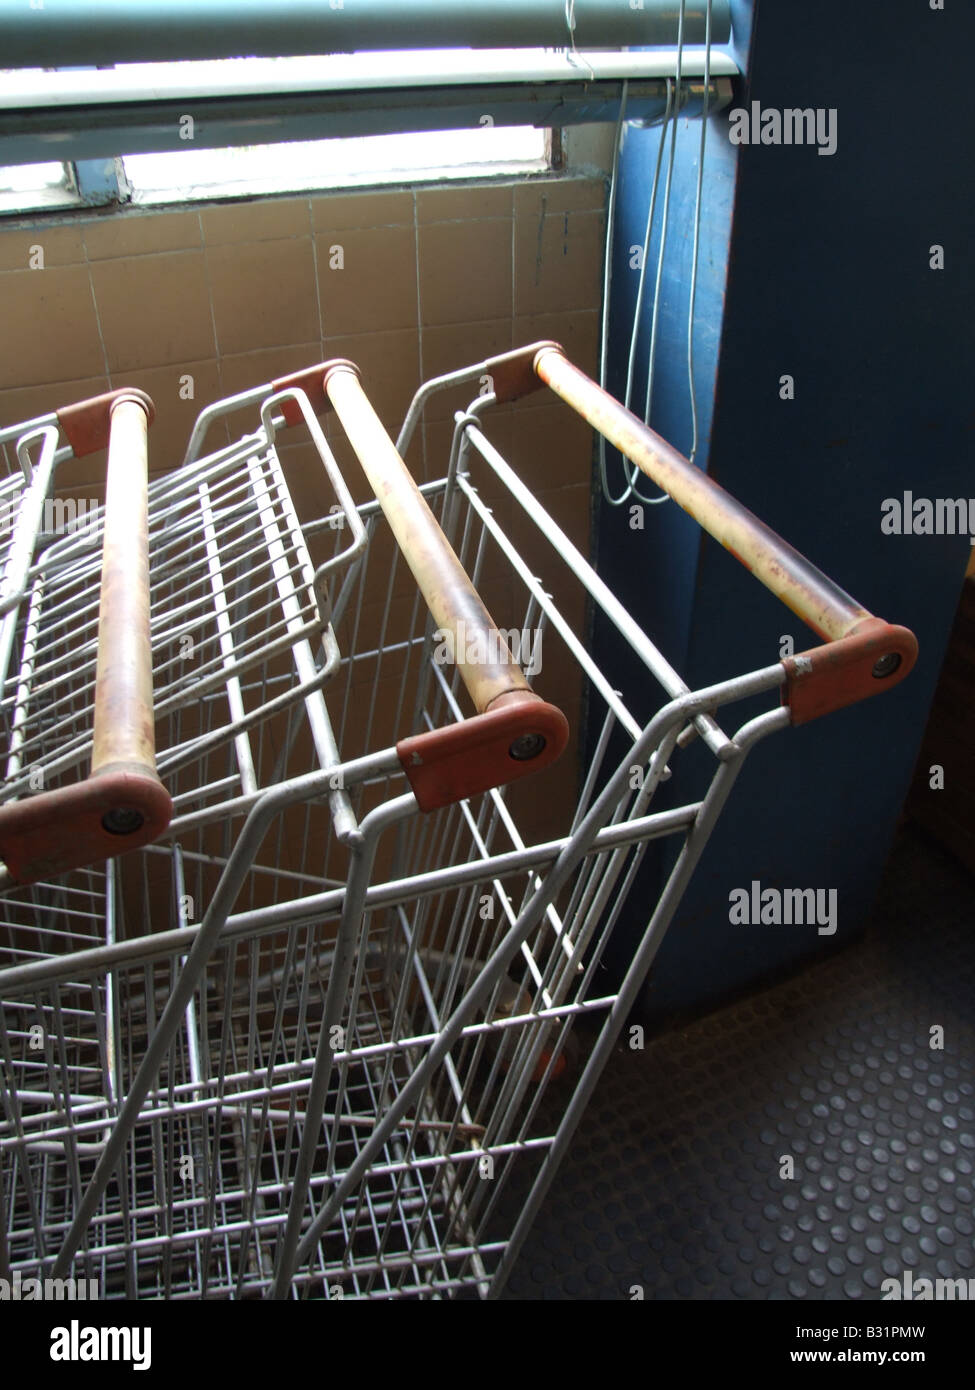 lots of old shopping trolleys at dark indoor market Stock Photo - Alamy